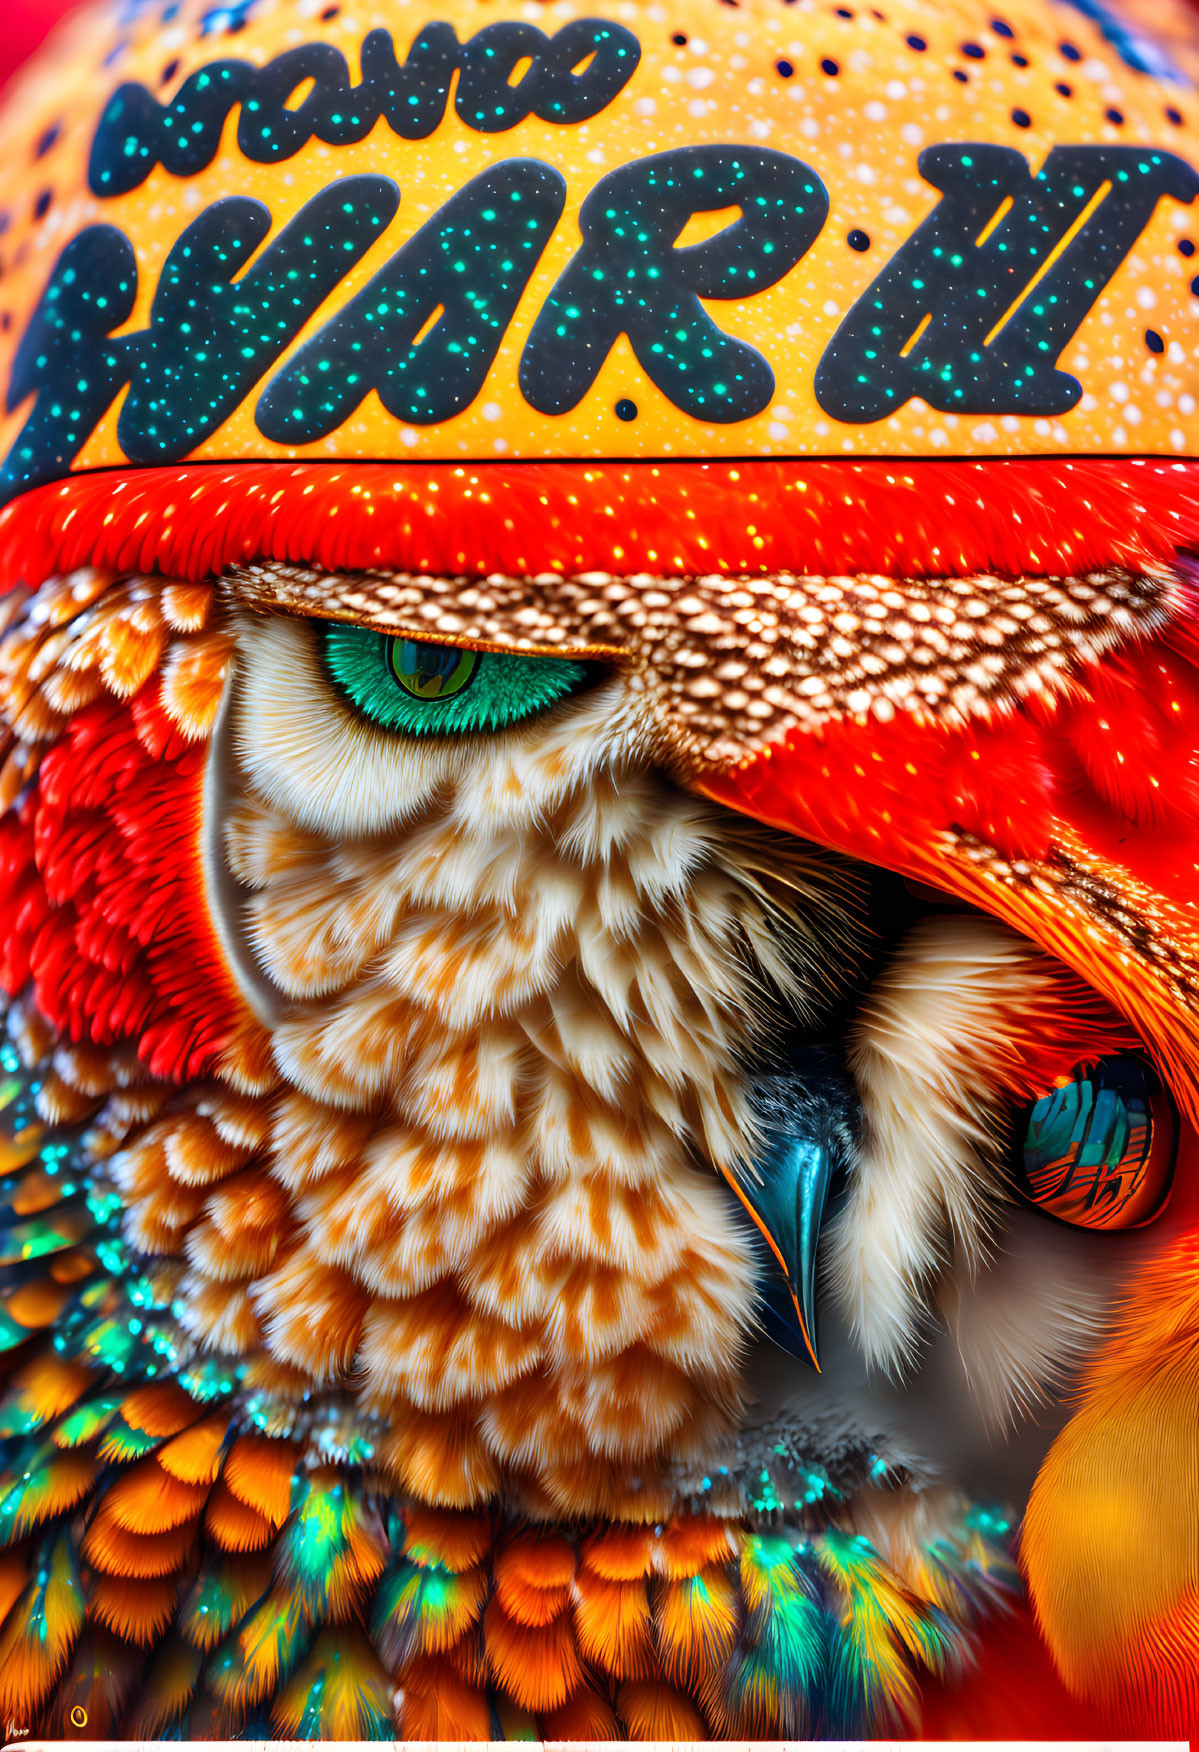 Colorful Digital Artwork: Owl with Intricate Patterns and Textures